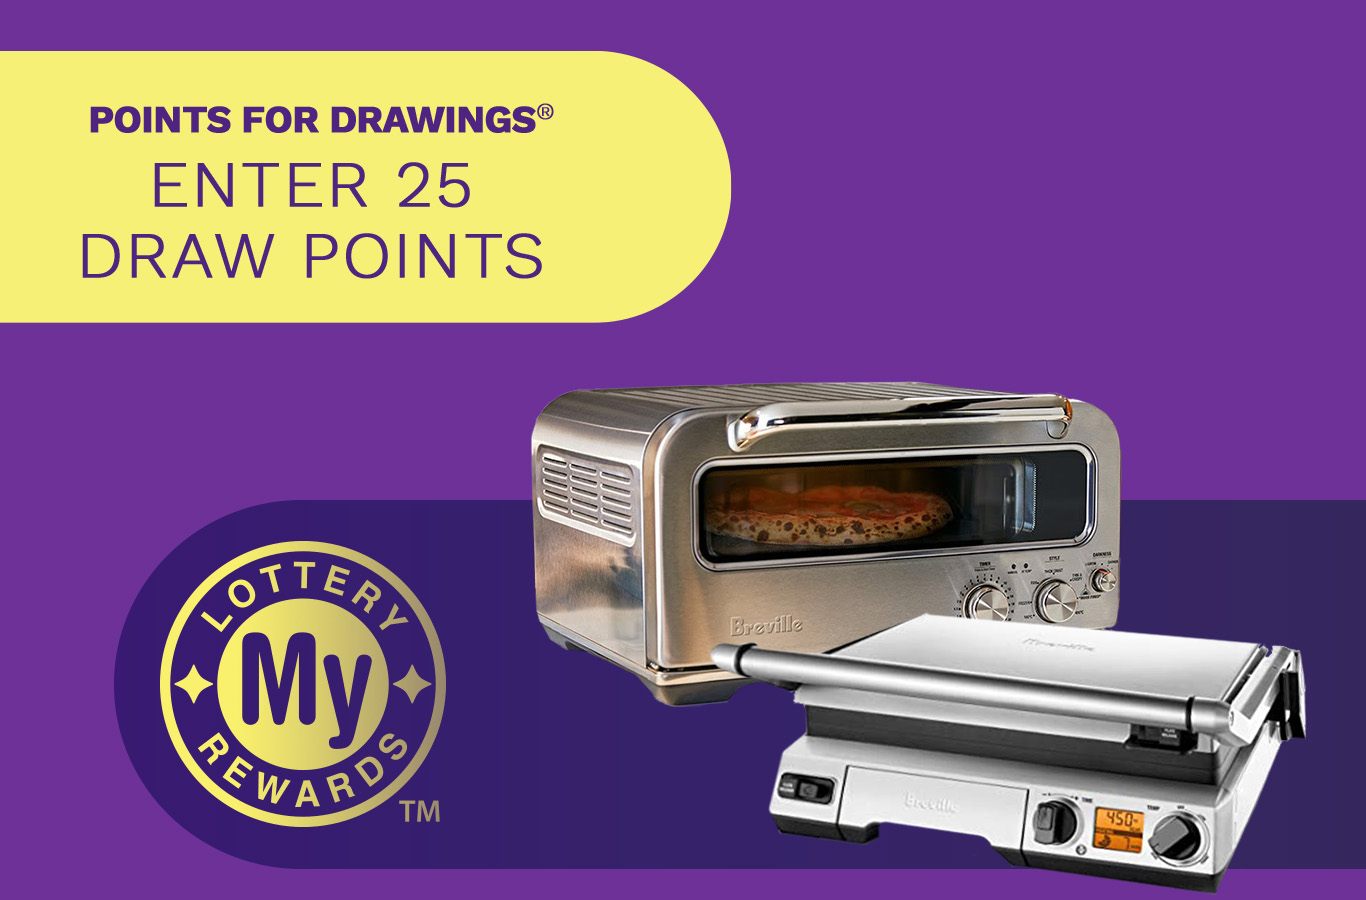 Here's your chance to win a Smart Pizza Oven & Grill Bundle! Enter by Sunday, December 18th.